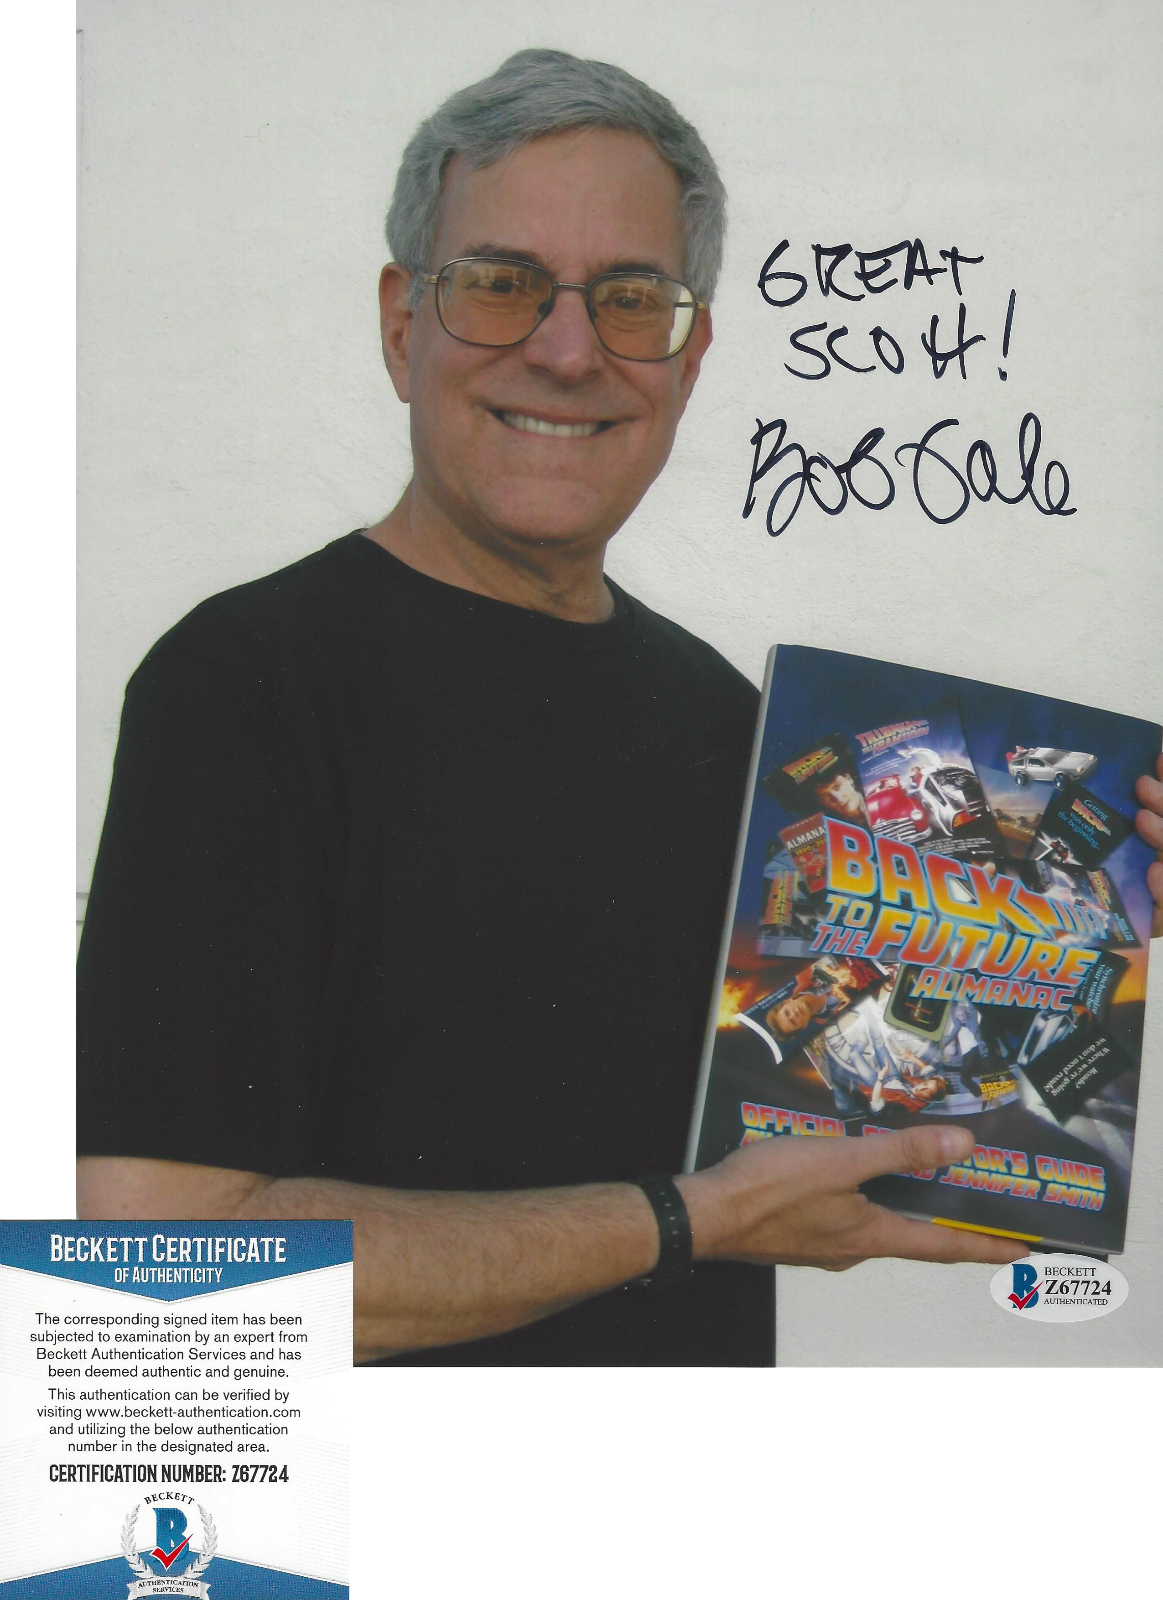 BOB GALE - BACK TO THE FUTURE SCREENWRITER - SIGNED 8x10 Photo Poster painting 5 BECKETT BAS COA